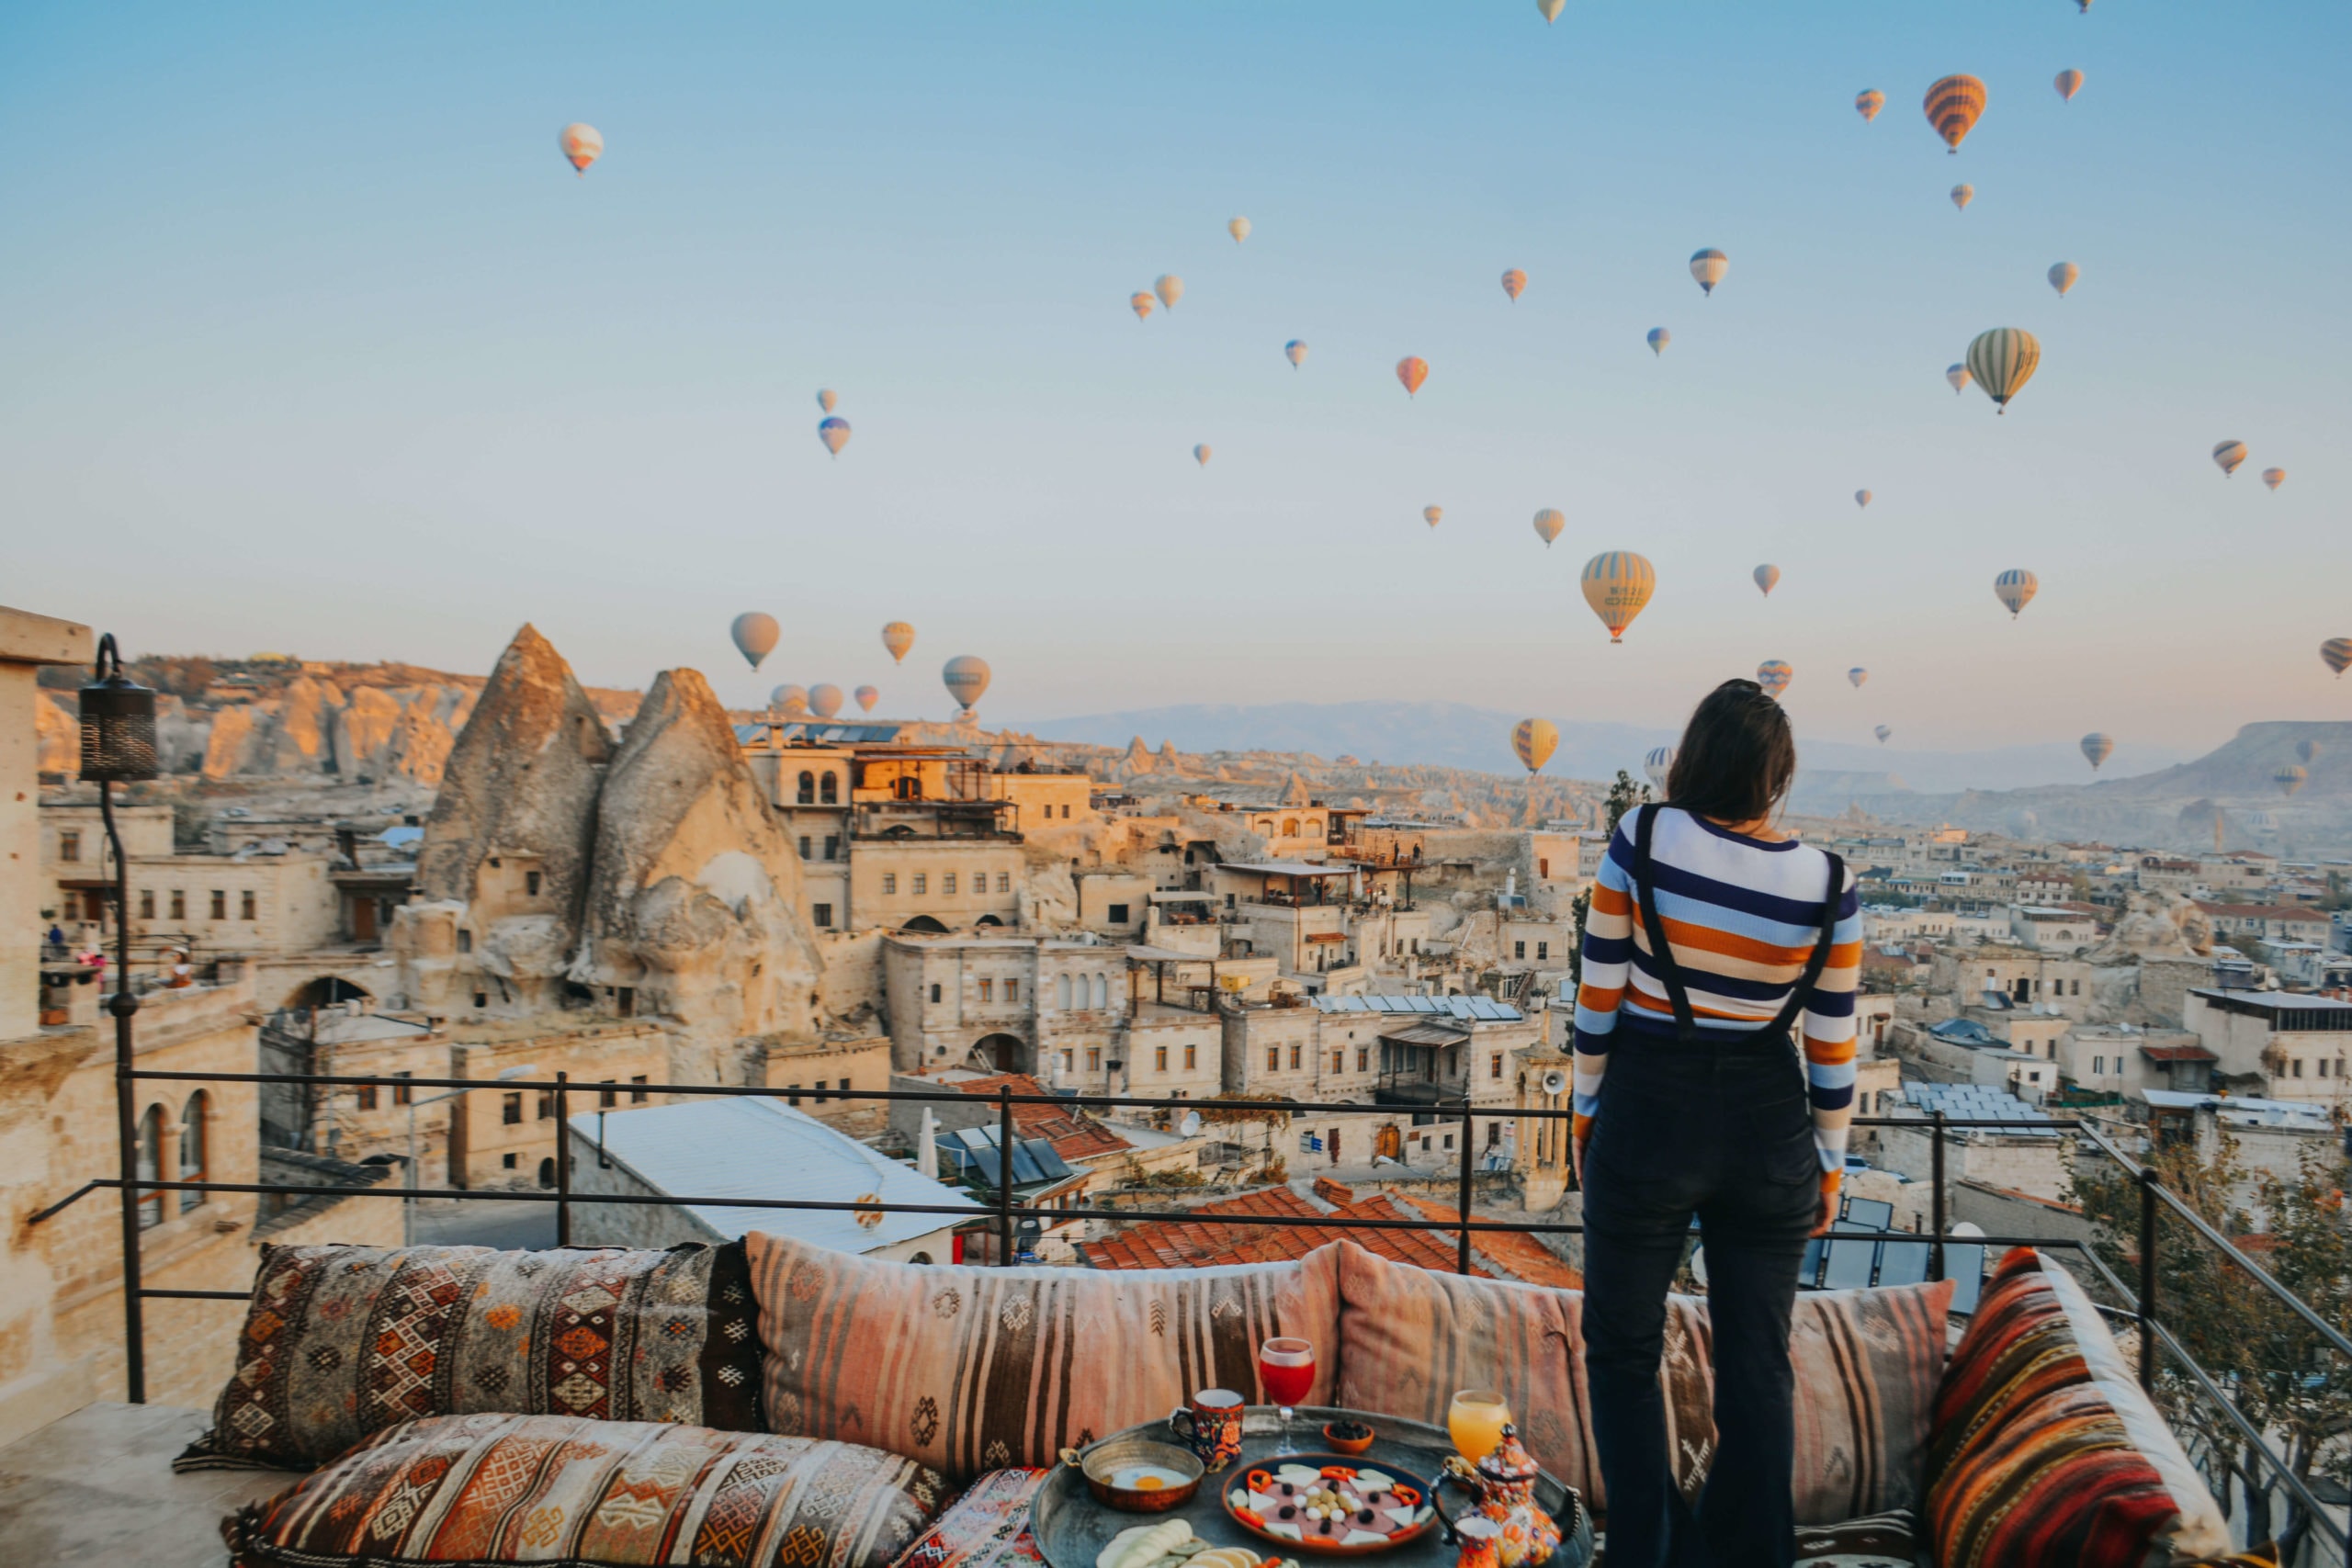 Travel bloggers reveal their most unforgettable travel experiences - Hot air ballooning in Cappadocia, Turkey